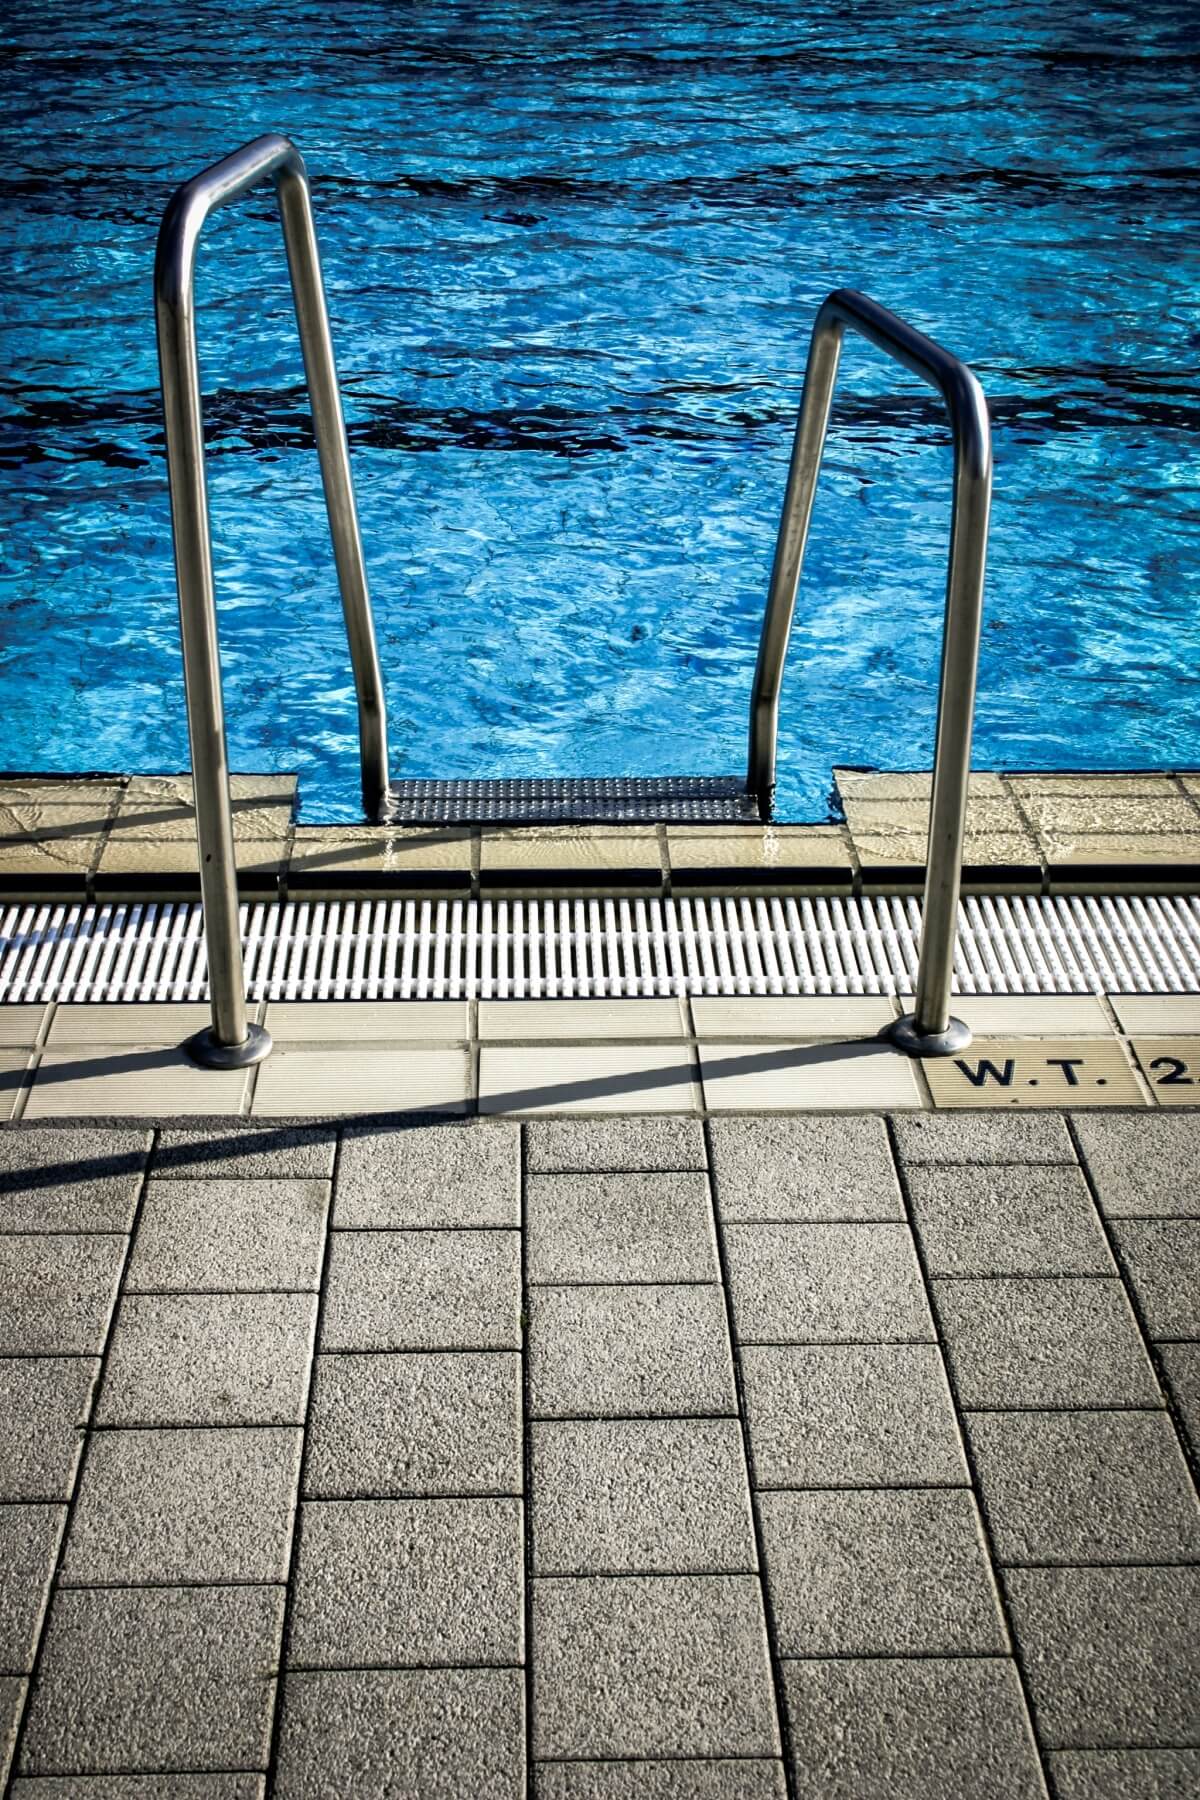 View of a swimming pool steps with assistance bars